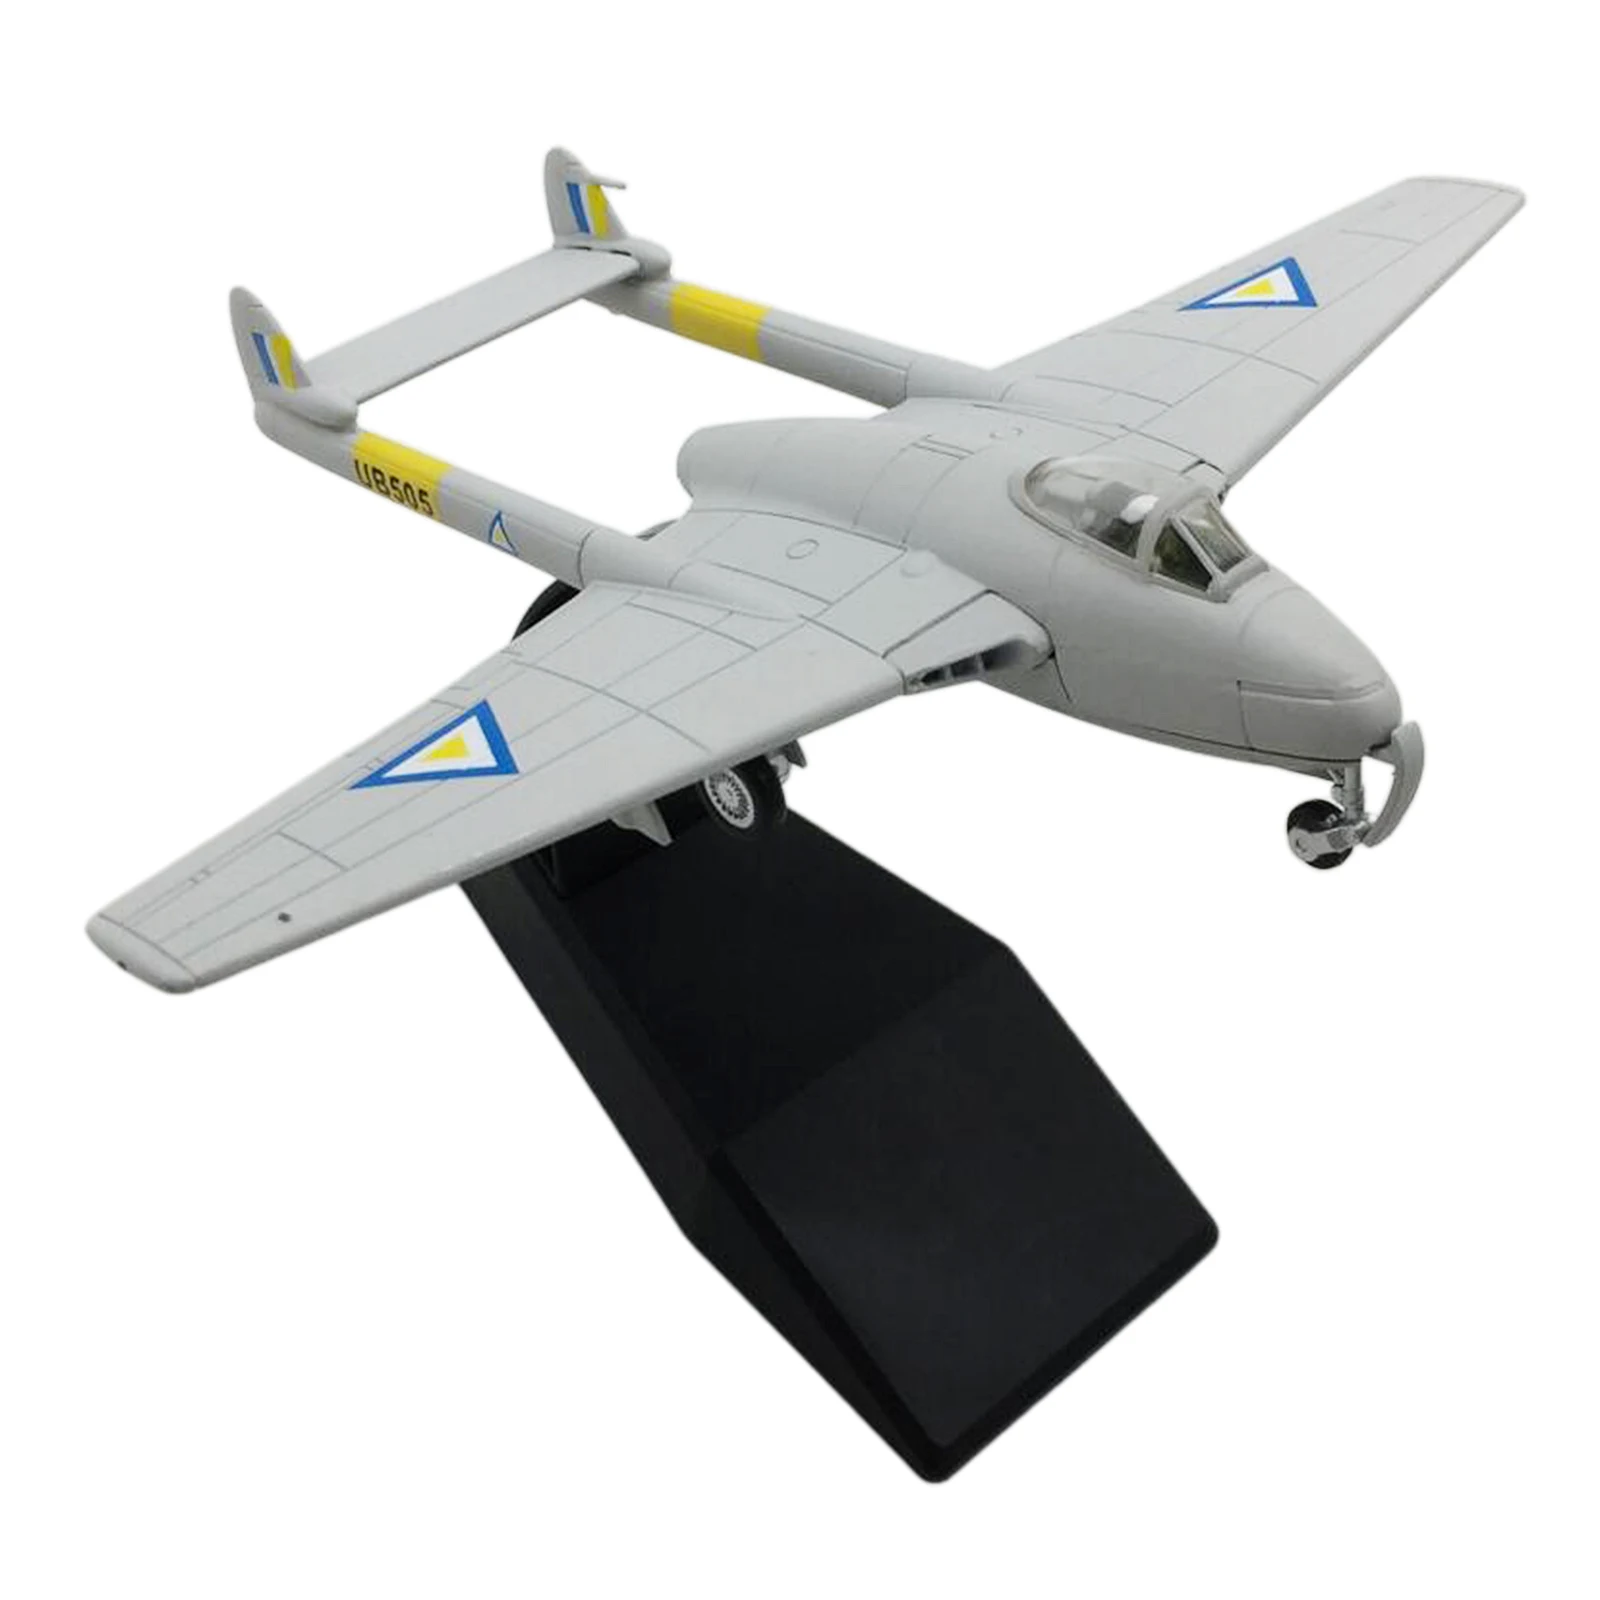 Metal 1:72 DH.115 T-55 Display Plane Air Fighter Model w/ Stand Office Bar Decor for Collection